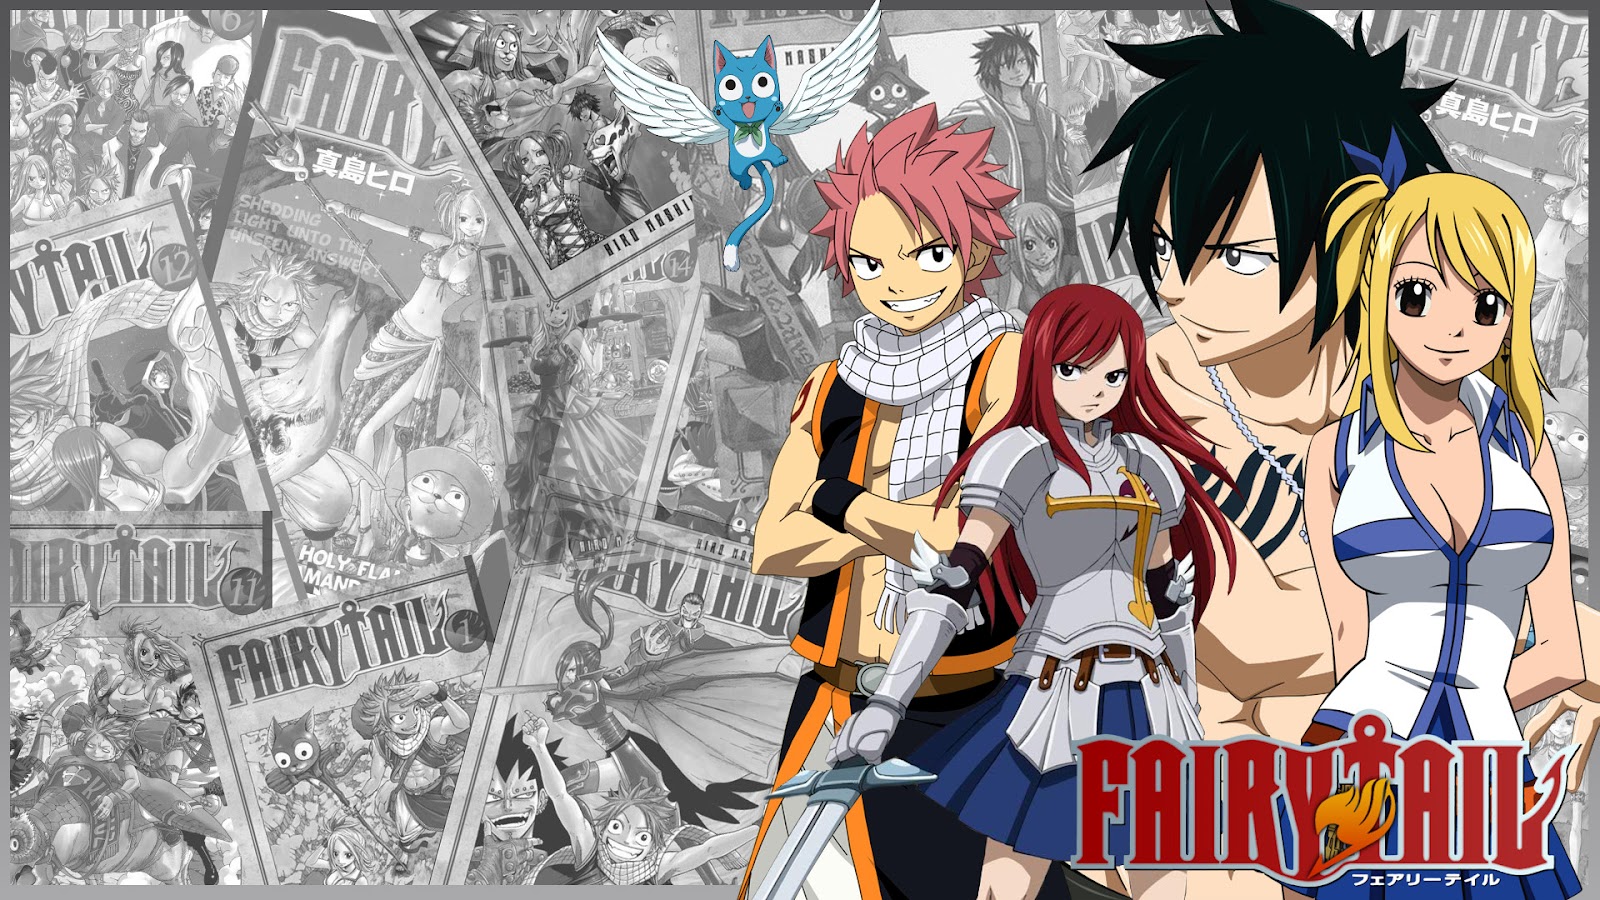 Free Download Fairy Tail Wallpaper 2 Fairy Tail Wallpaper 3 Fairy Tail Wallpaper 4 1600x900 For Your Desktop Mobile Tablet Explore 44 Fairy Tale Background Wallpaper Fairytale Wallpaper Fairy